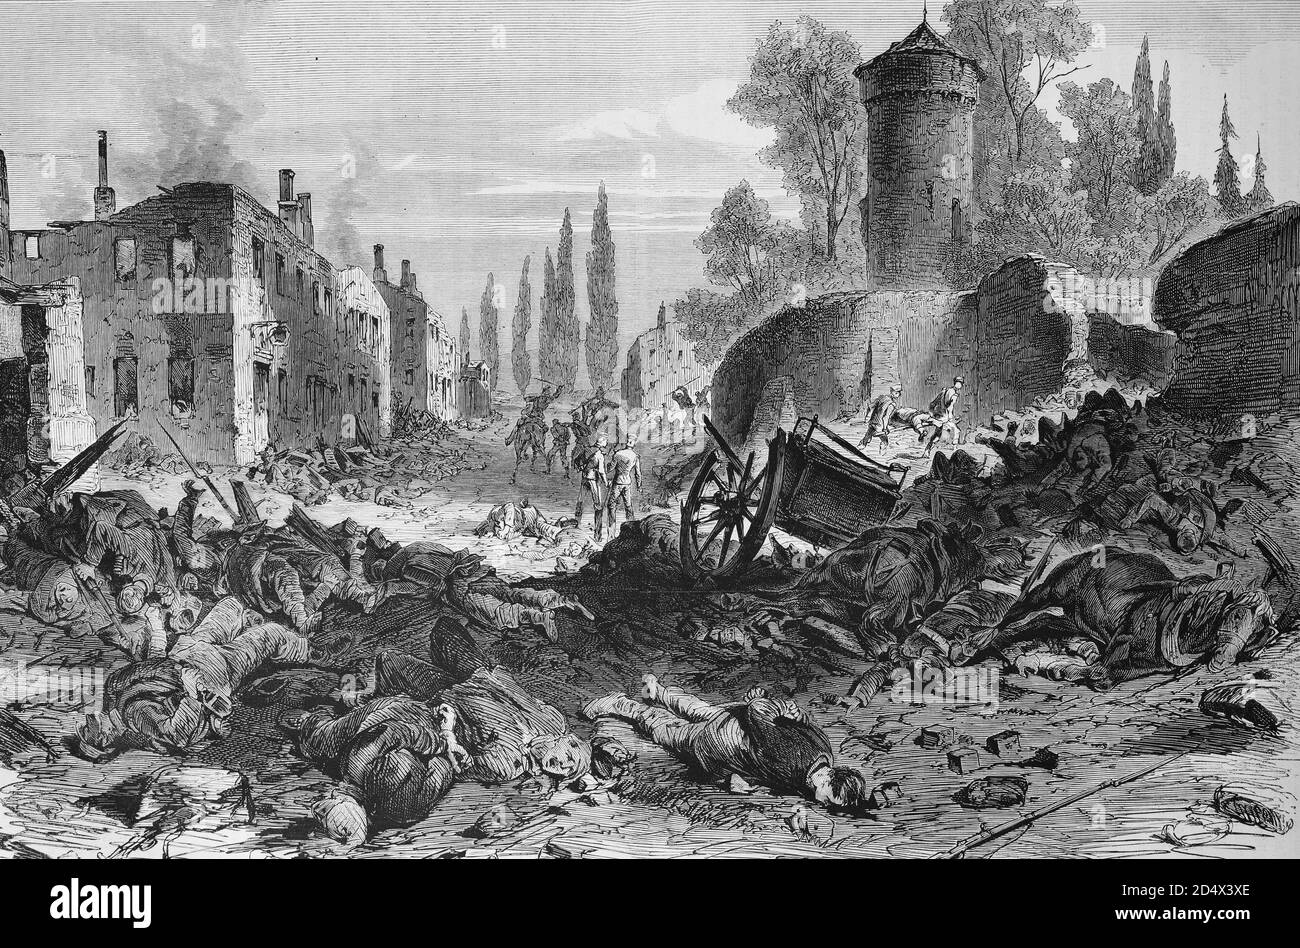 Bazeilles after the storming by the bavarians in the Battle of Sedan, illustrated war history, German - French war 1870-1871 Stock Photo